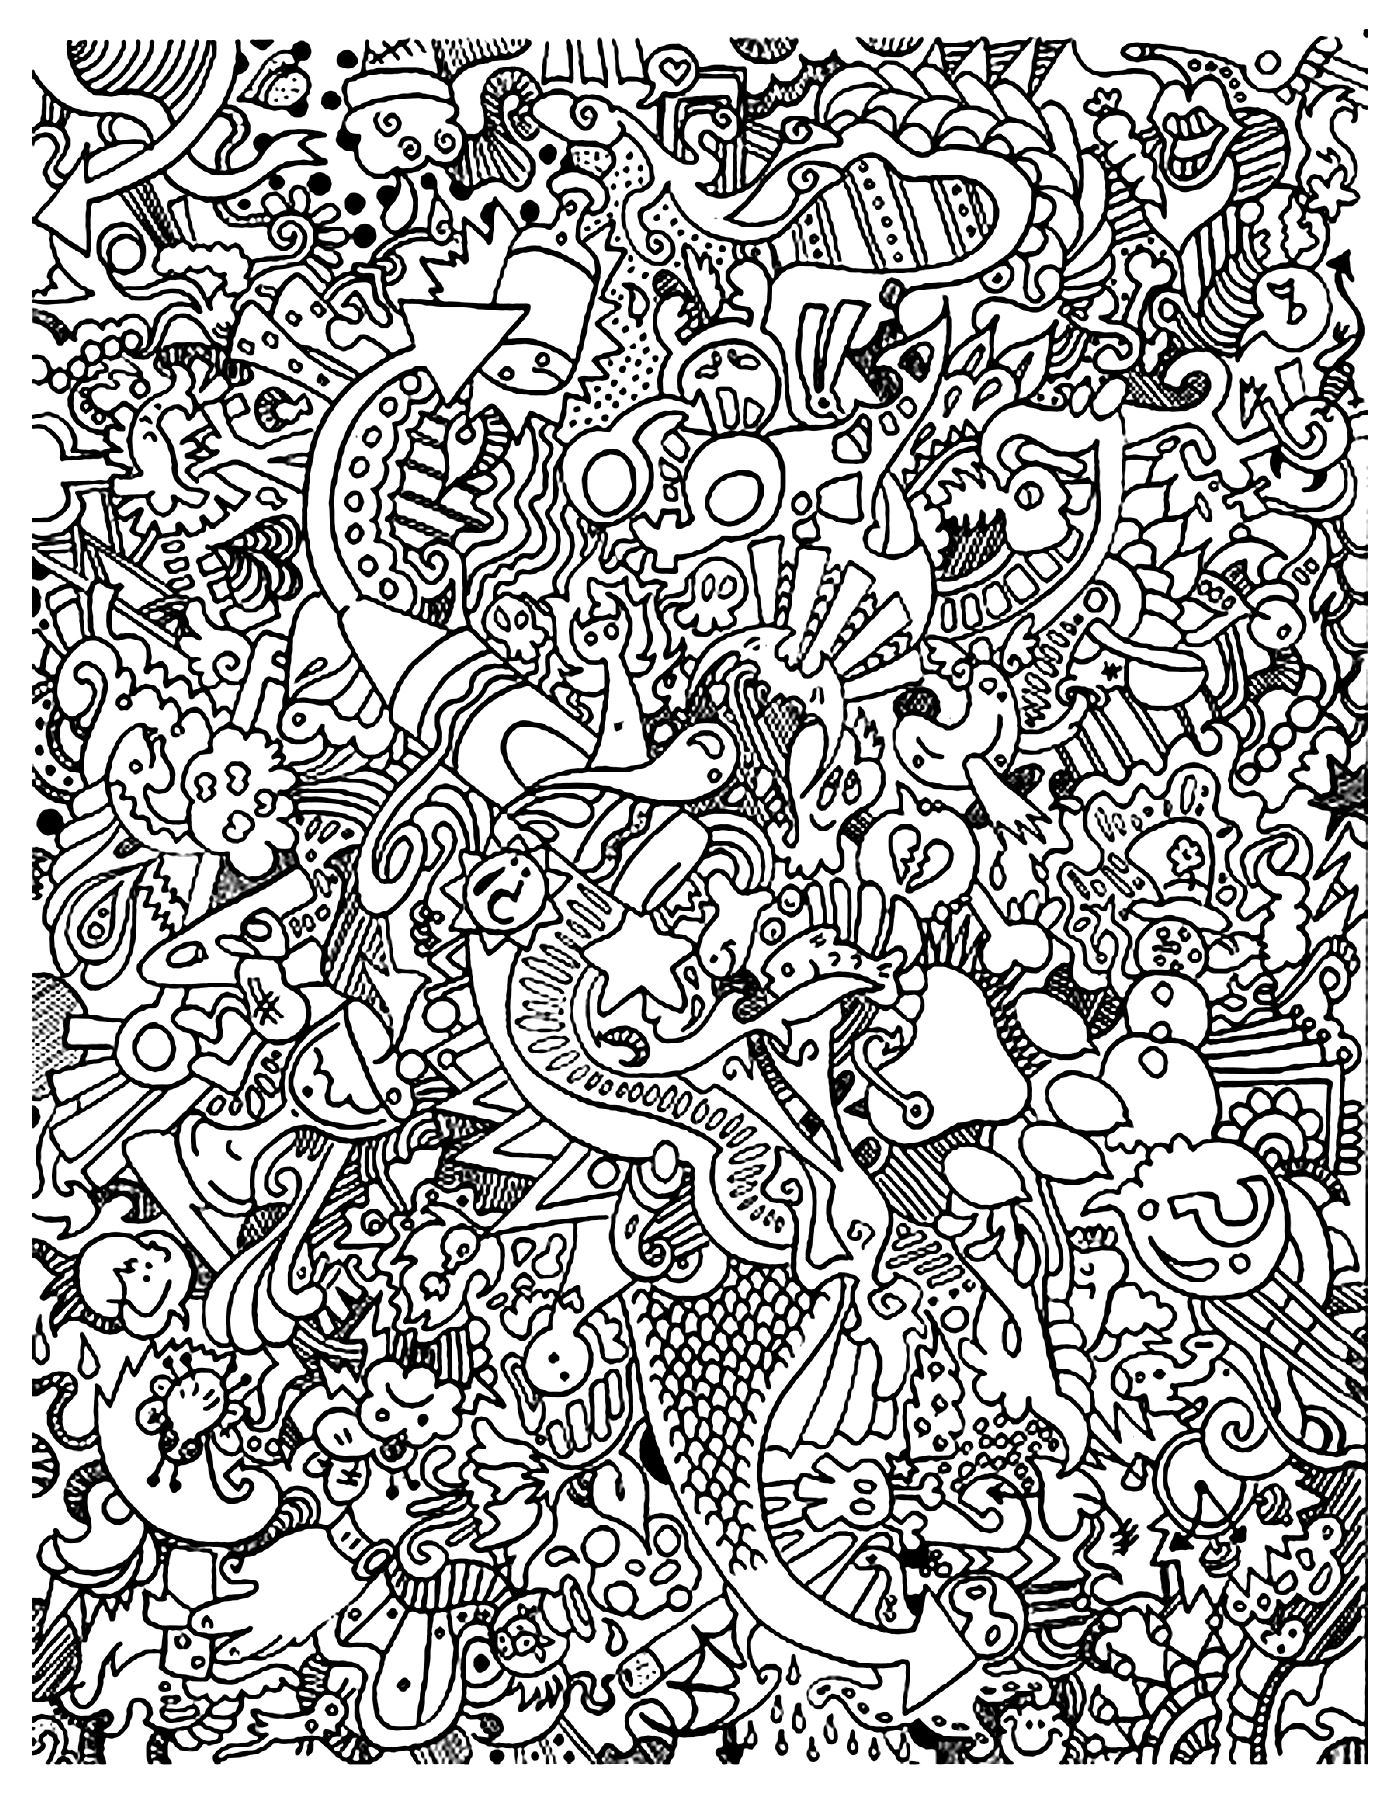 Doodling / Doodle art - Coloring pages for adults : coloring-doodle-art